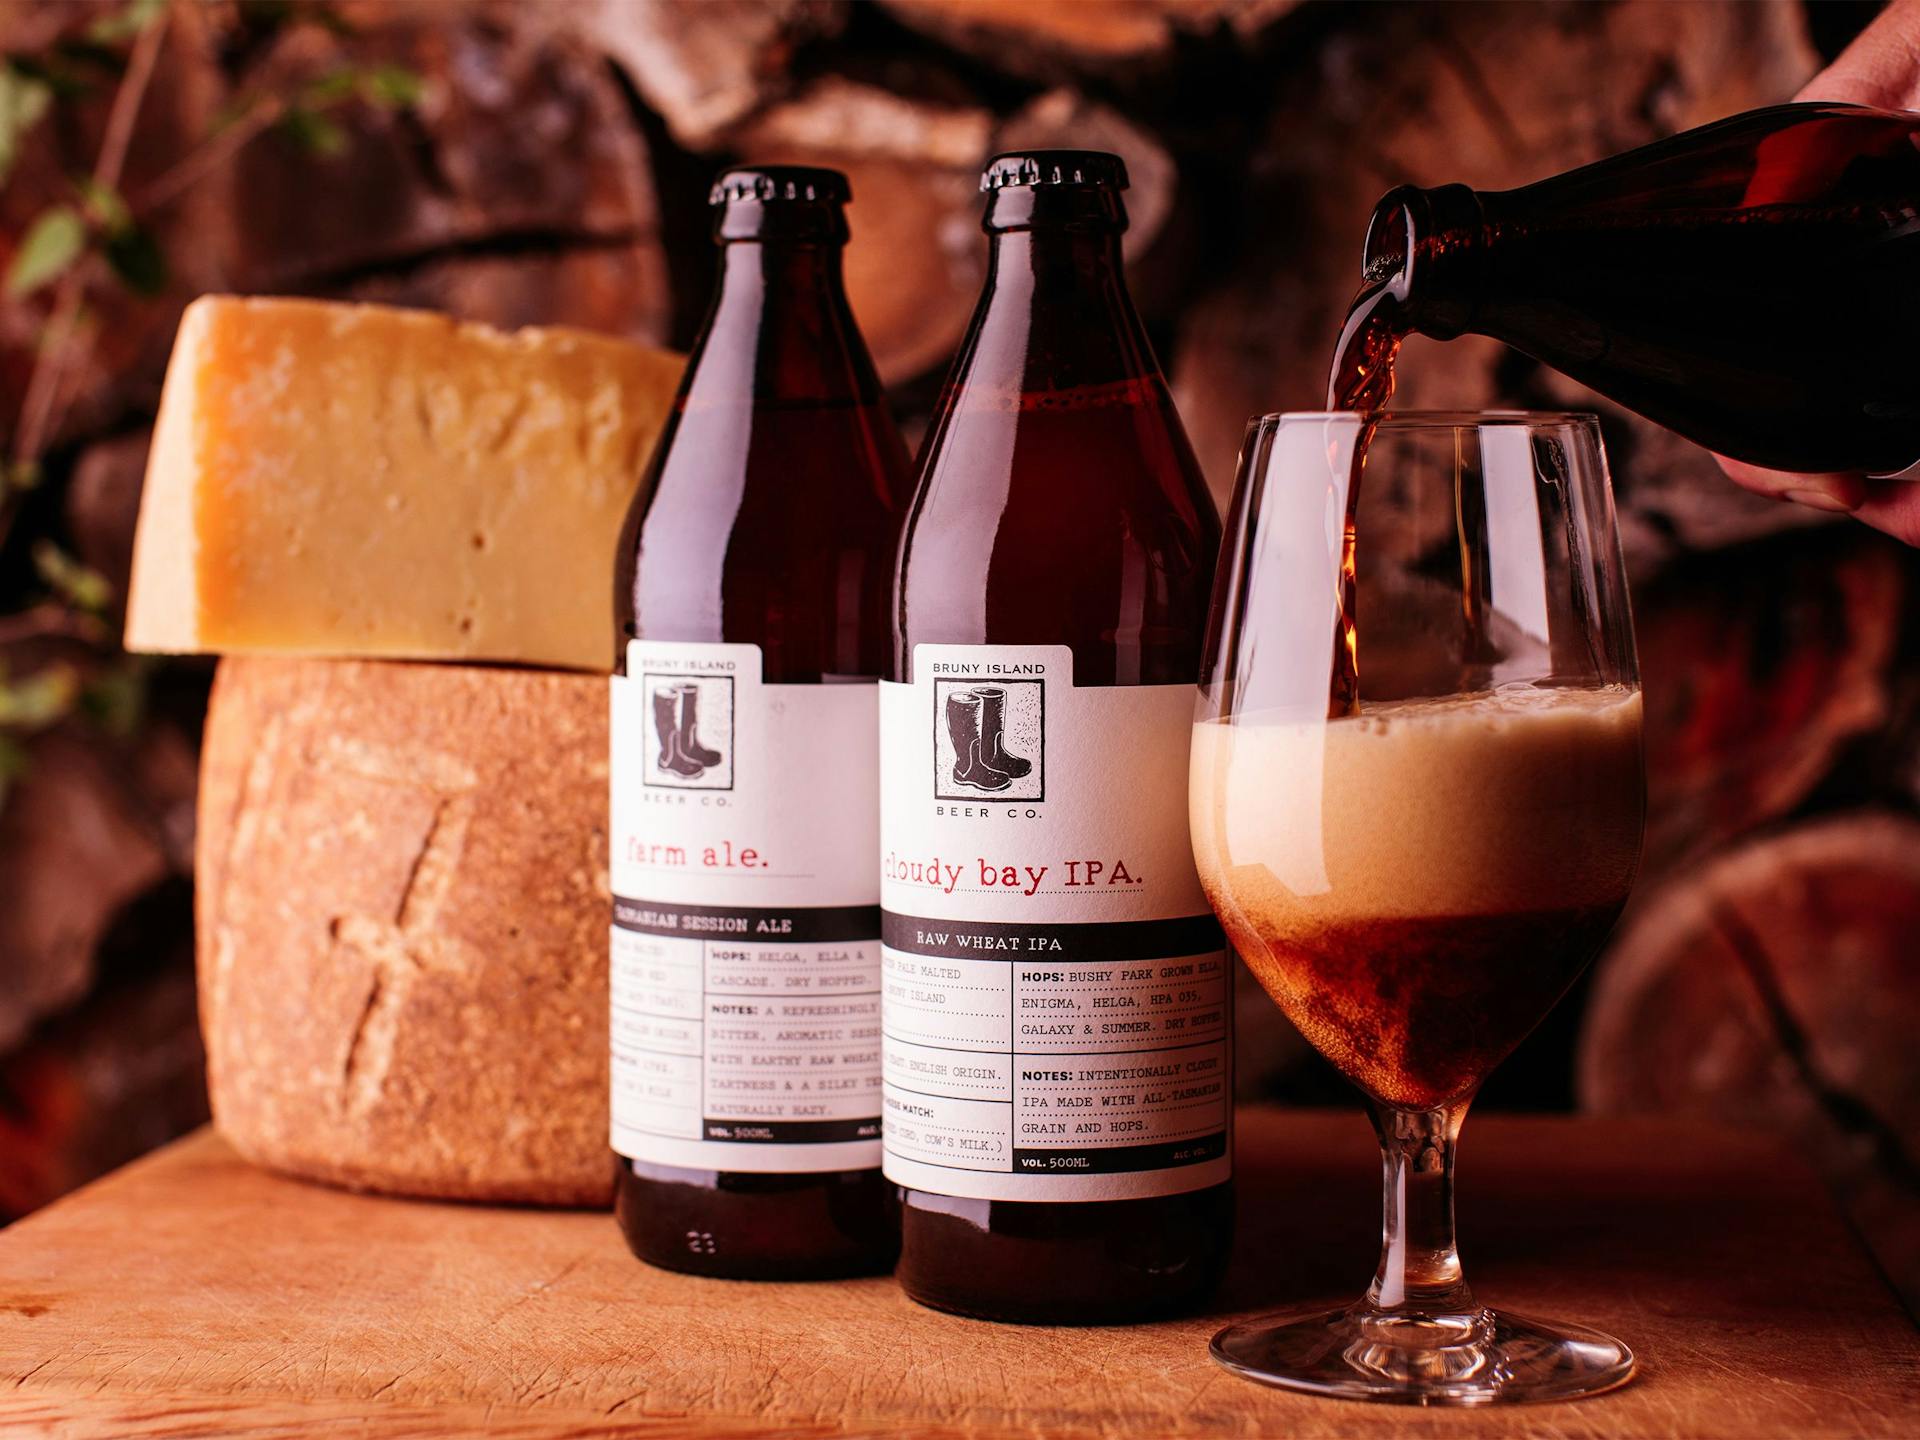 Two Bruny Island beers sit next to a wheel of cheese and a glass of dark ale